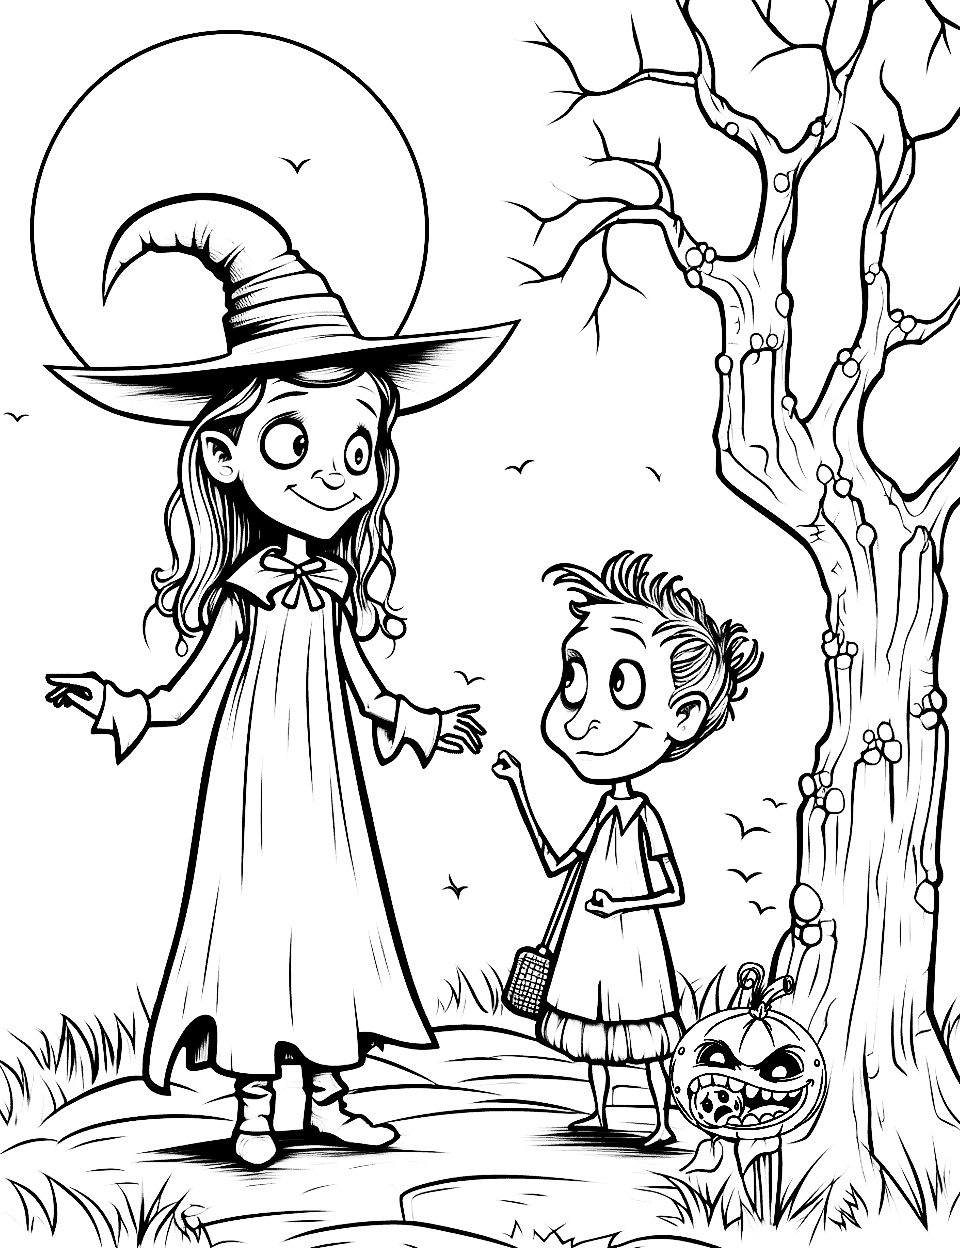 Witch Meeting Frankenstein Coloring Page - A friendly encounter between a witch and a cartoonish Frankenstein in a moonlit forest.